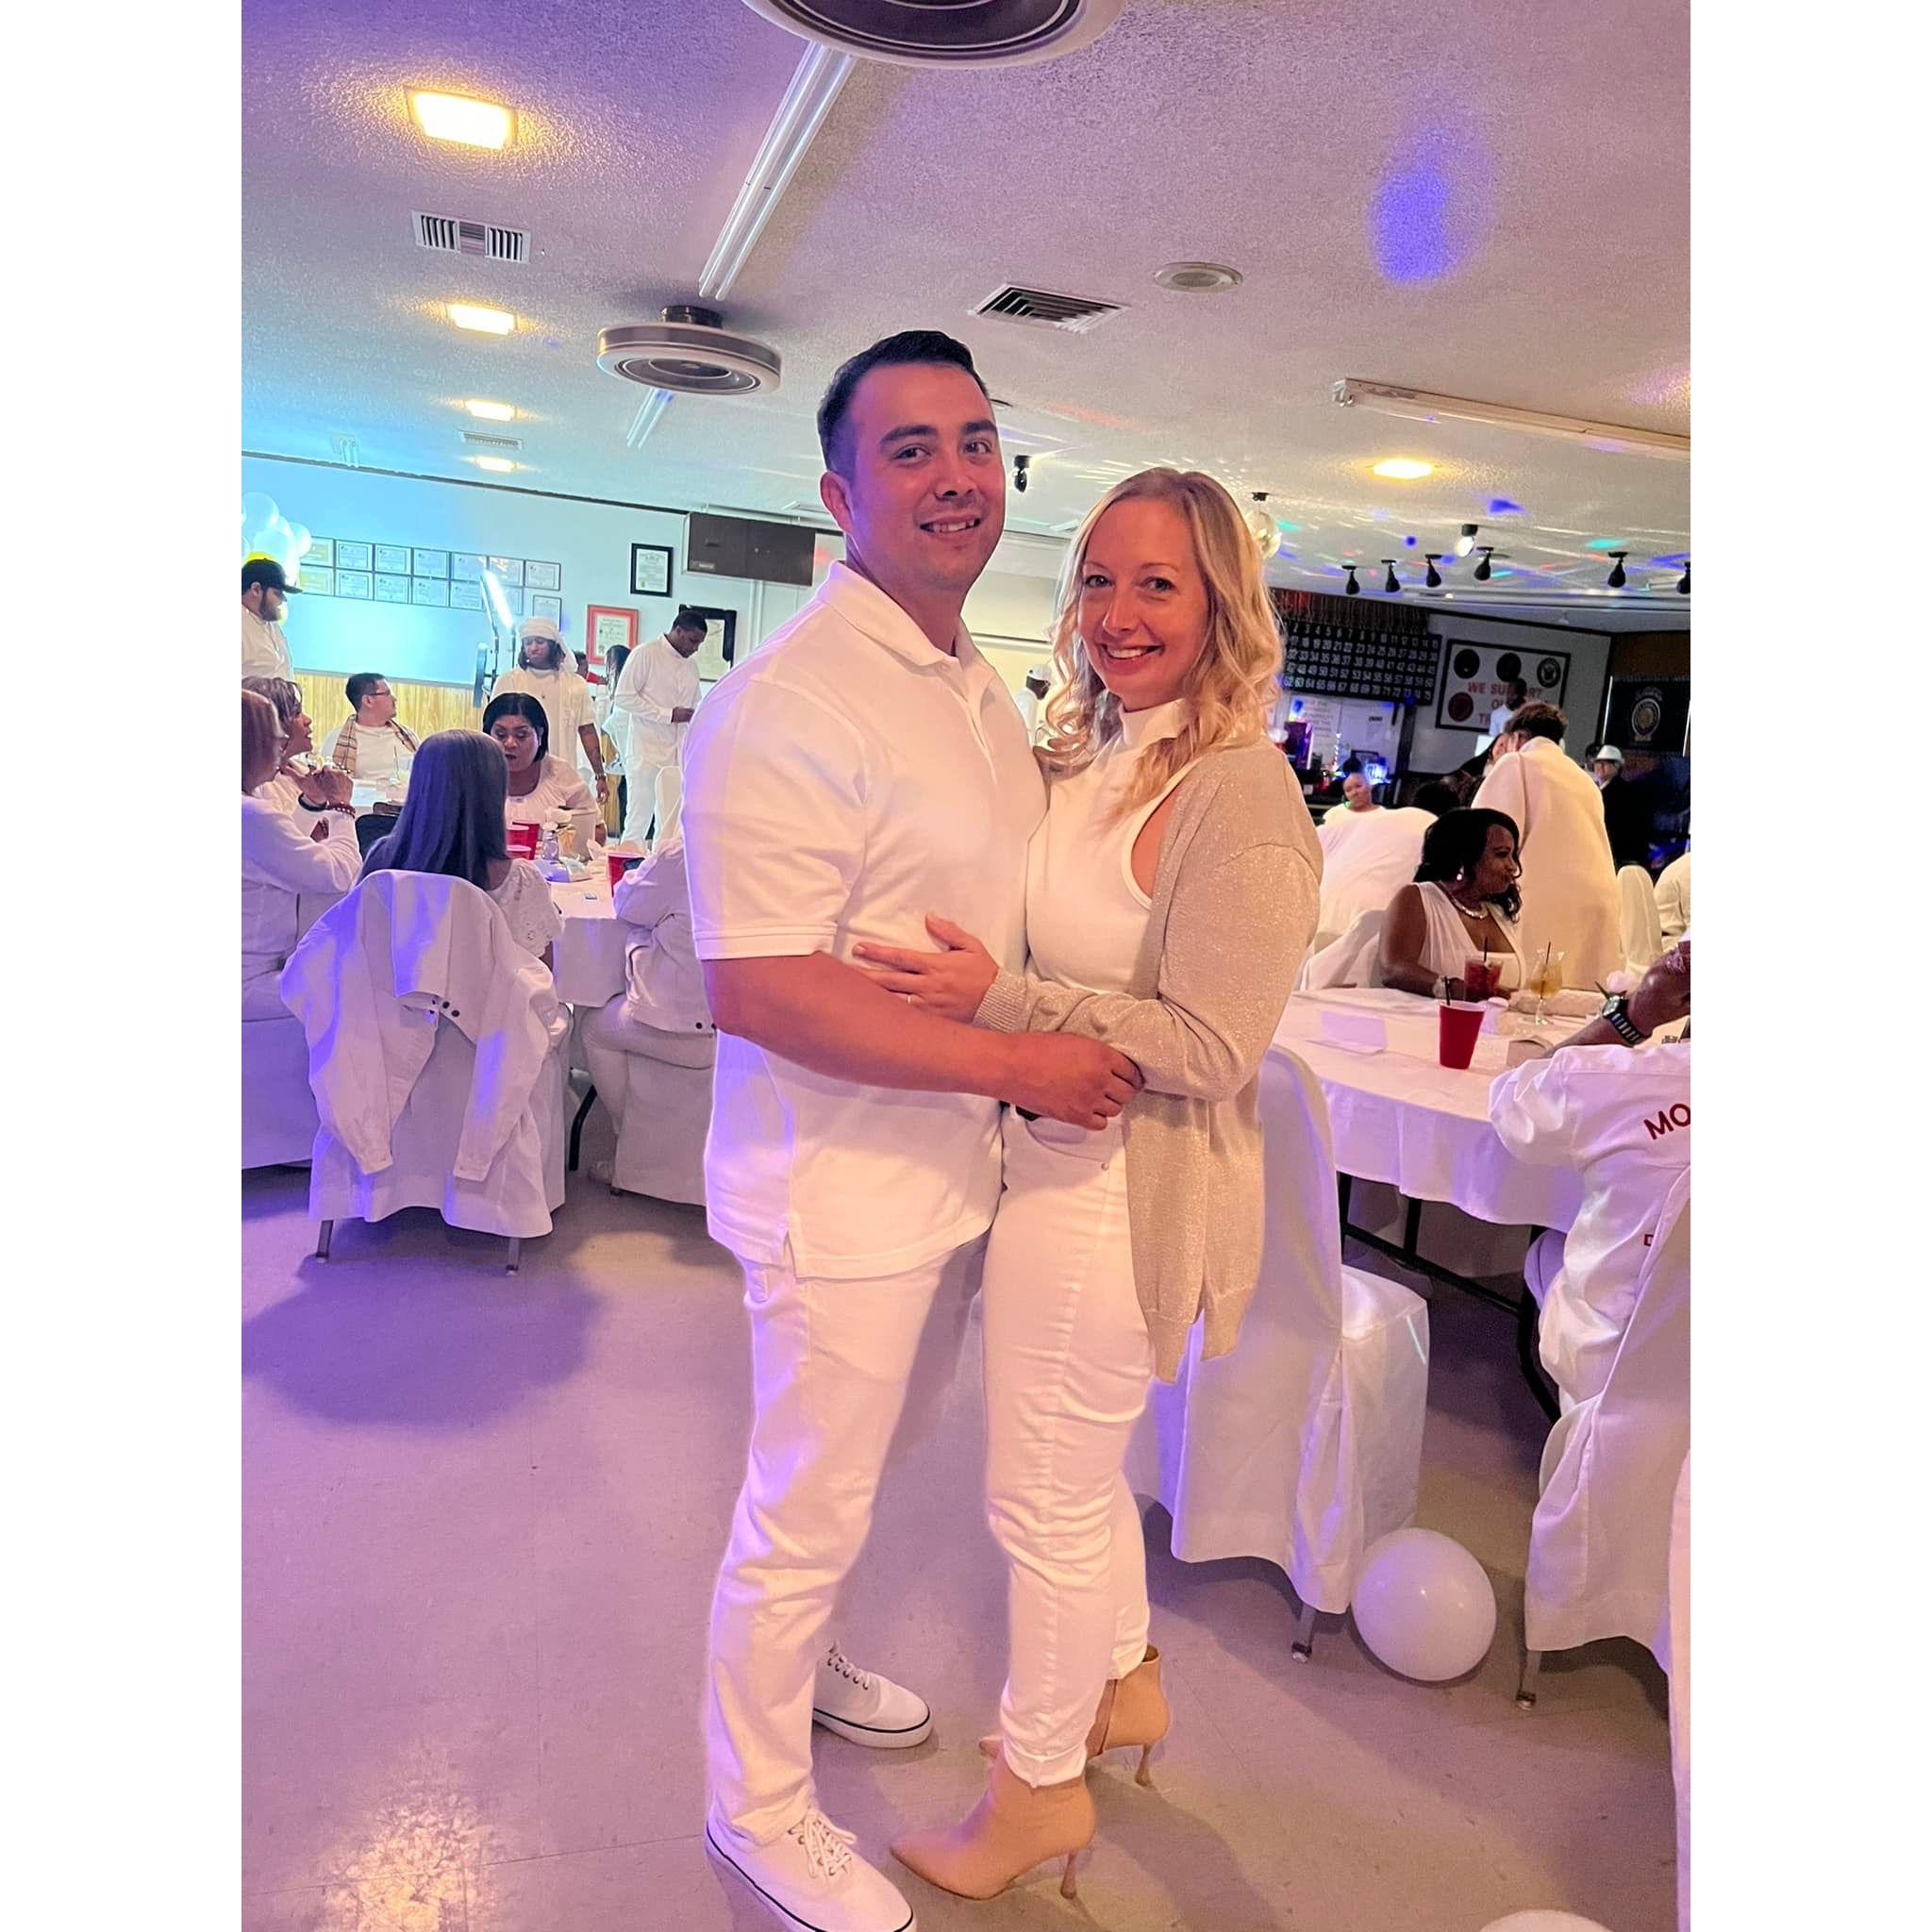 Good times at the 'all-white' party